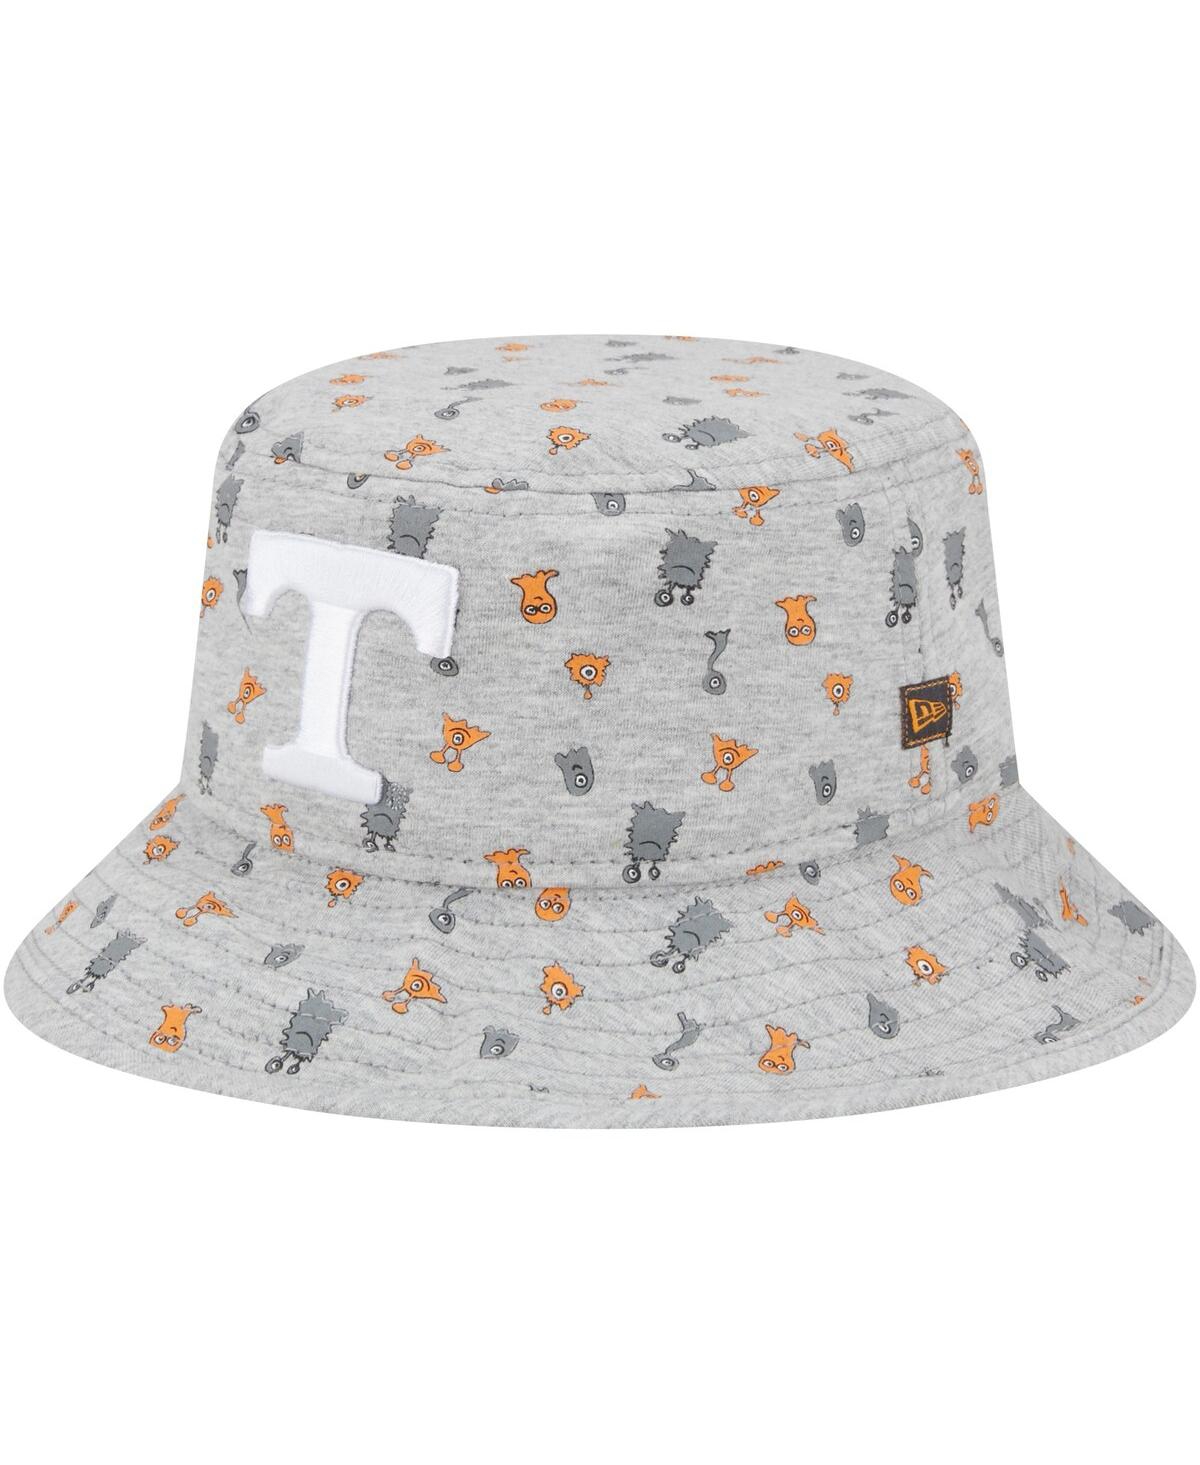 New Era Babies' Toddler Boys And Girls  Heather Gray Tennessee Volunteers Critter Bucket Hat